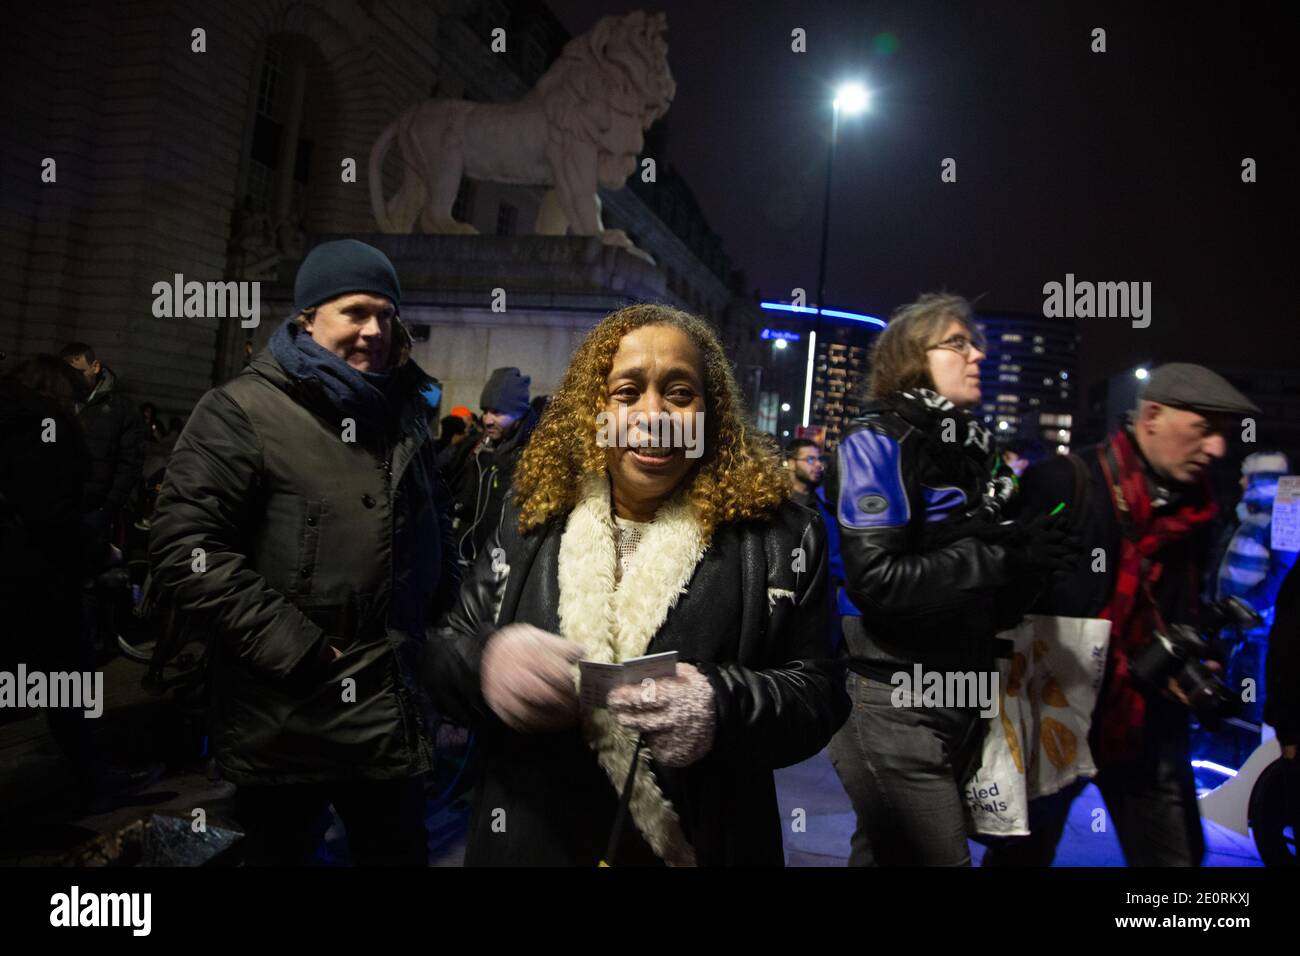 Anti lockdown protesters on New Year's Eve on Westminster Bridge. — 31. December 2020, England, London, UK Stock Photo